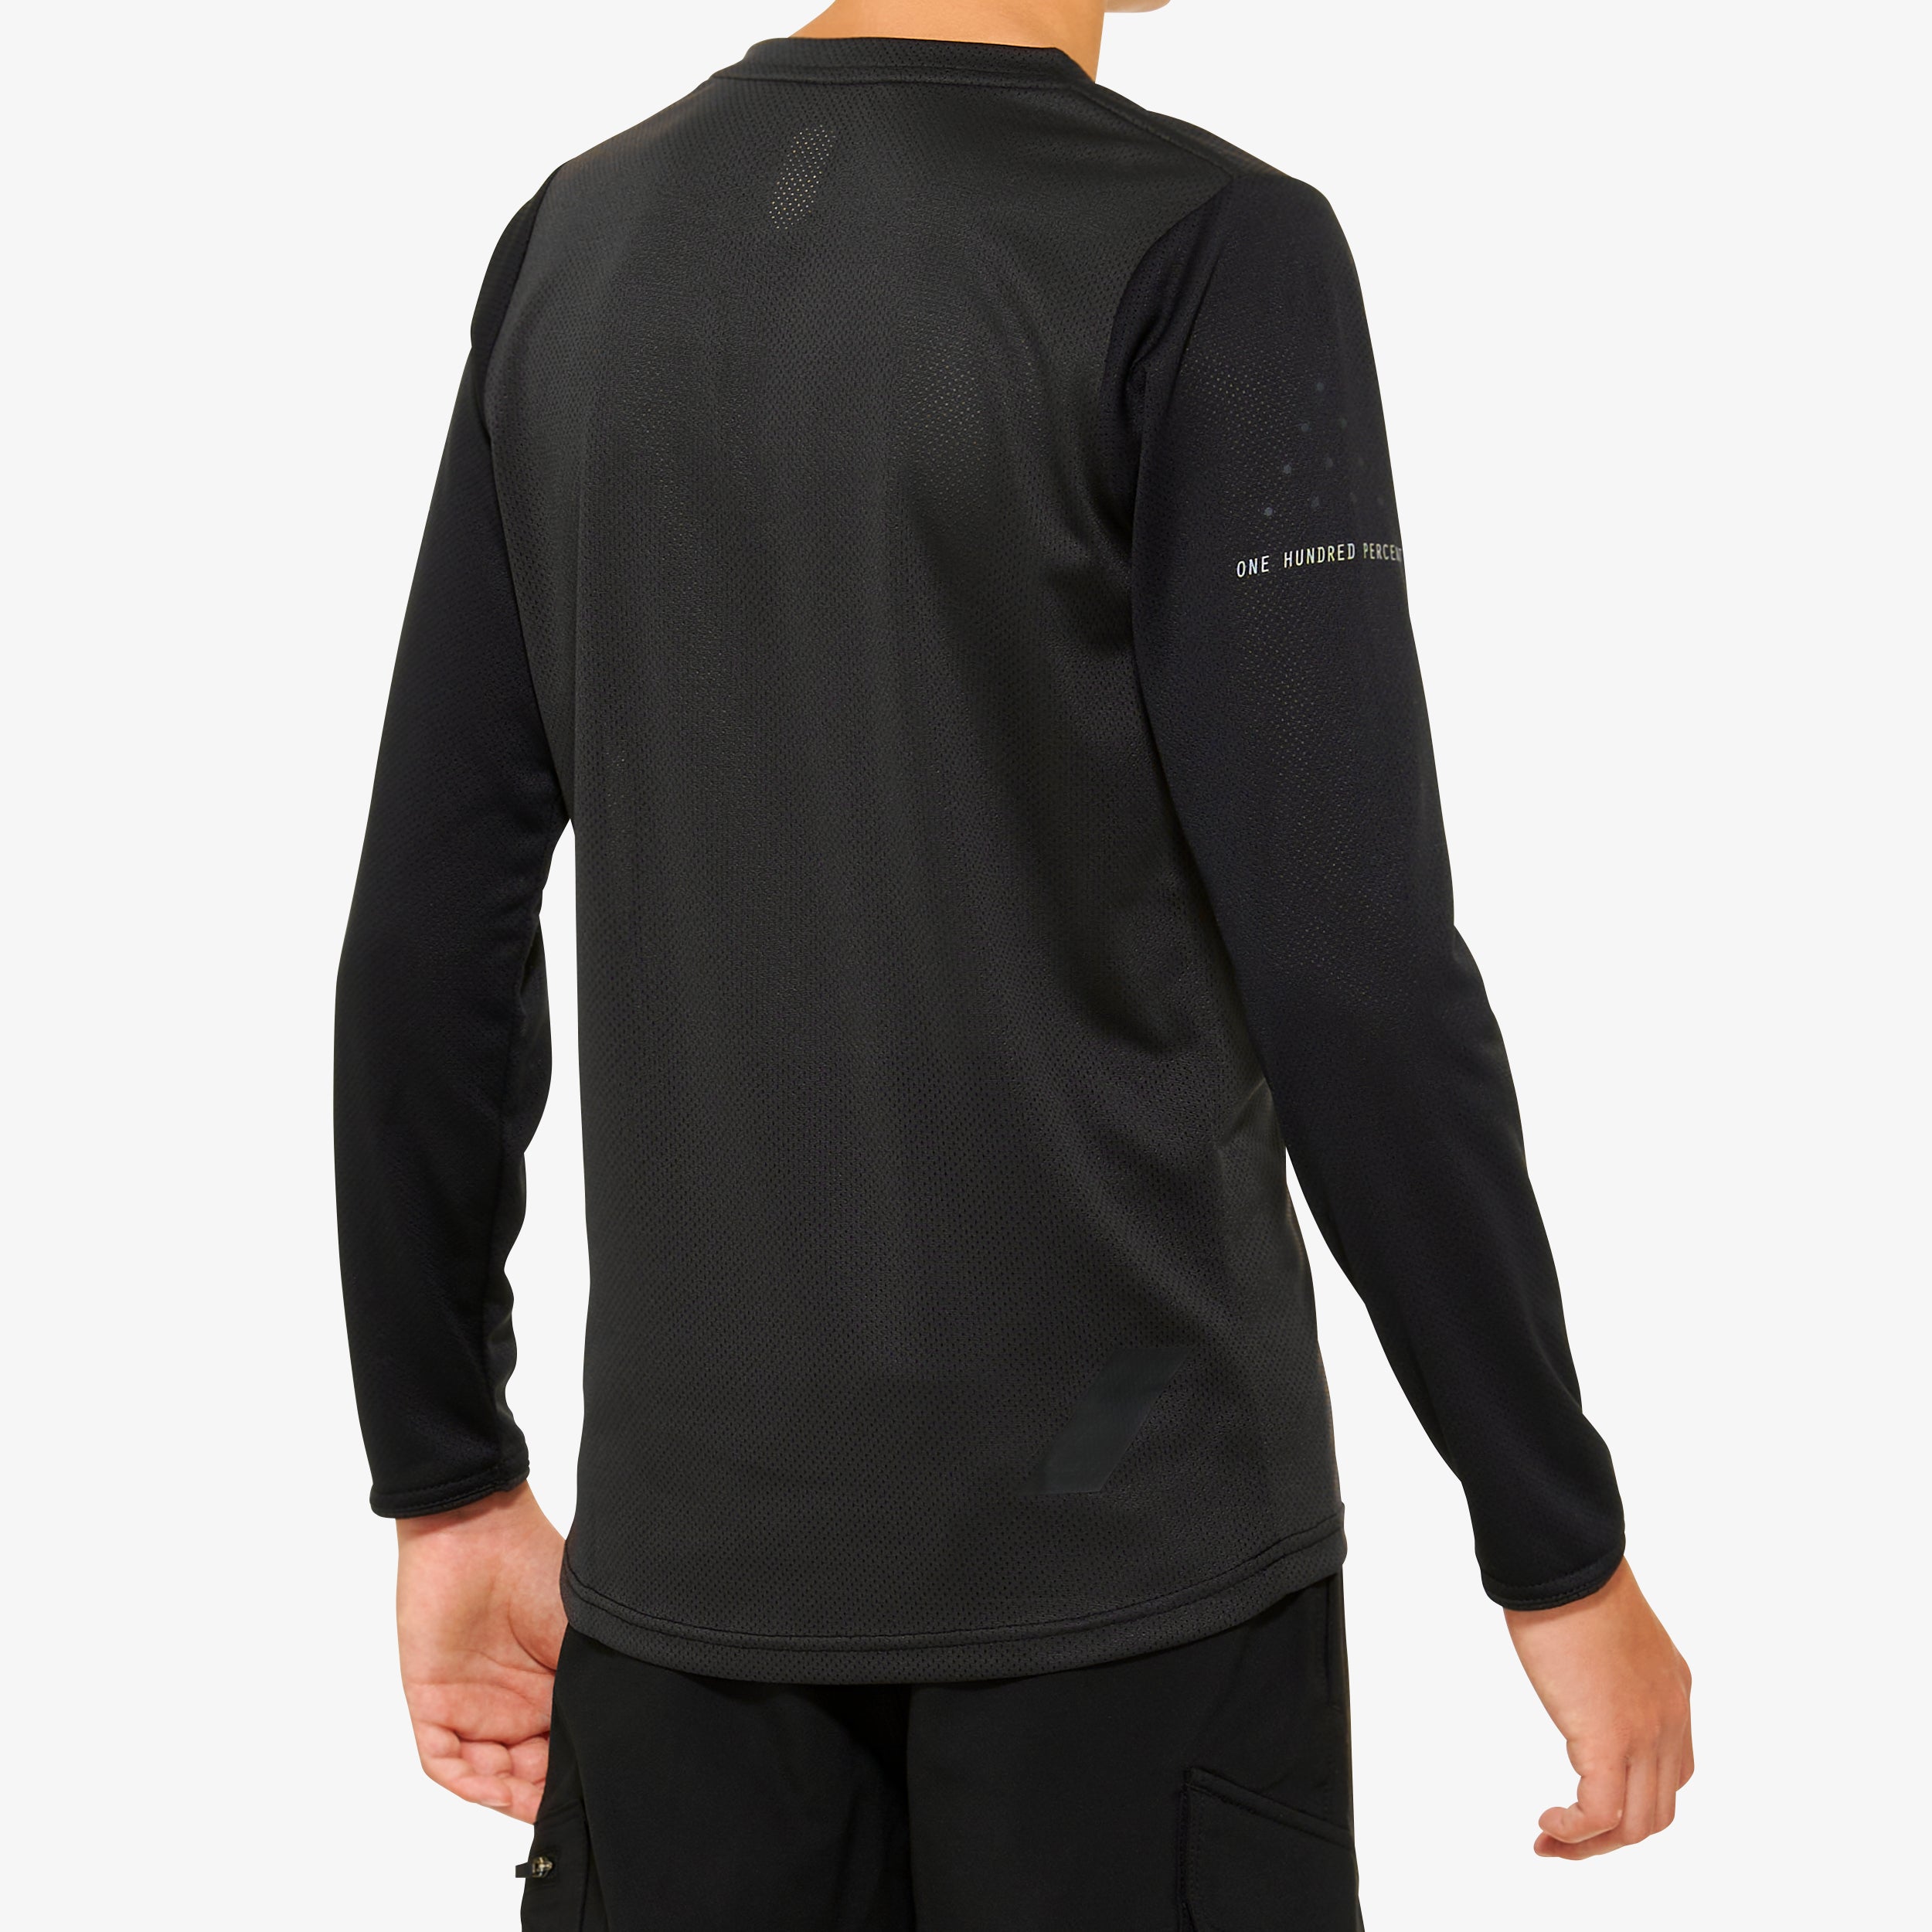 RIDECAMP Youth Long Sleeve Jersey Black/Charcoal - Secondary